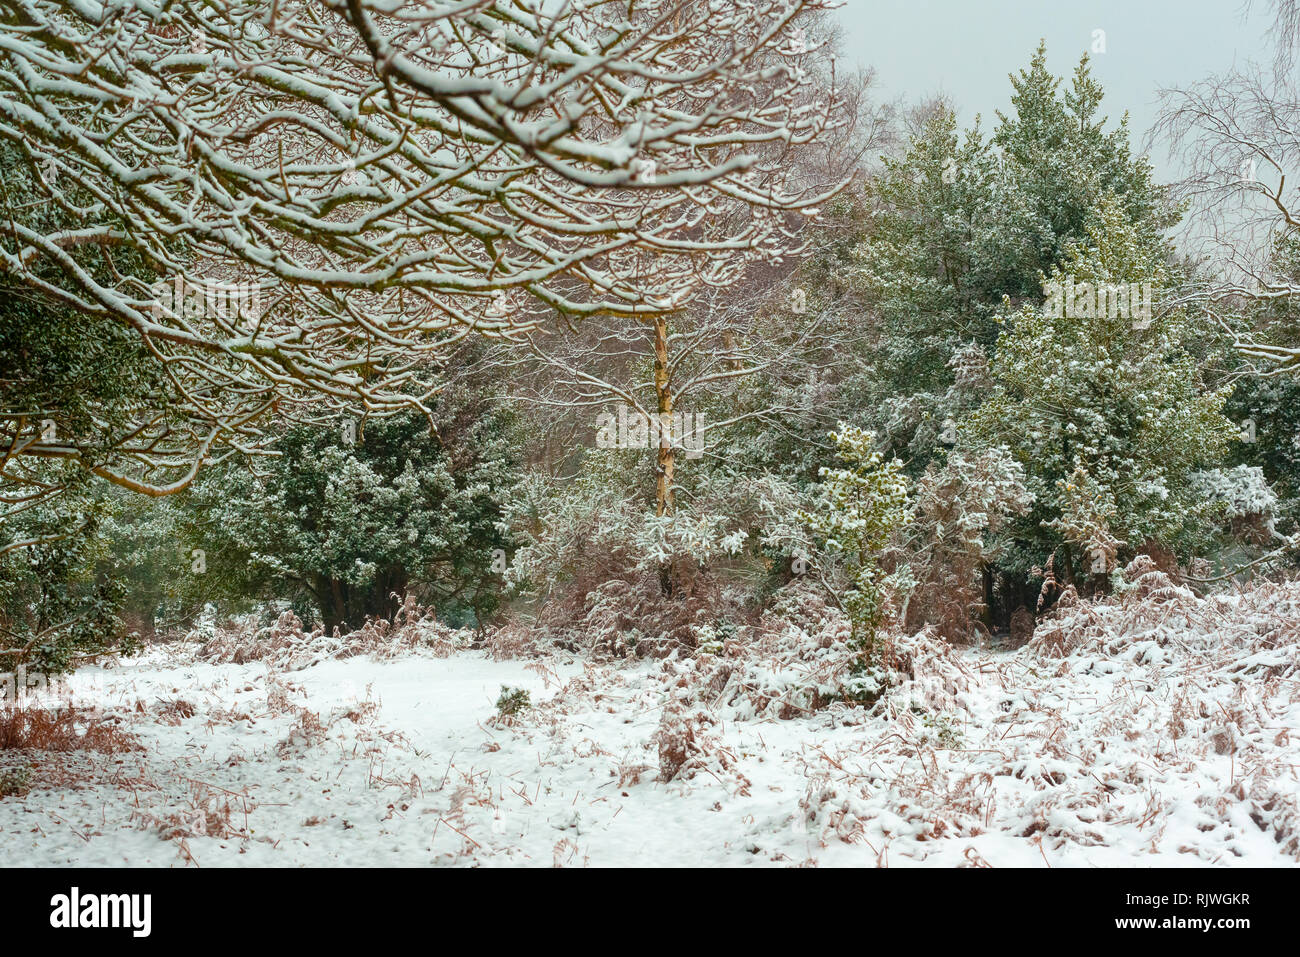 Snowy forest scene with a green tint. Stock Photo